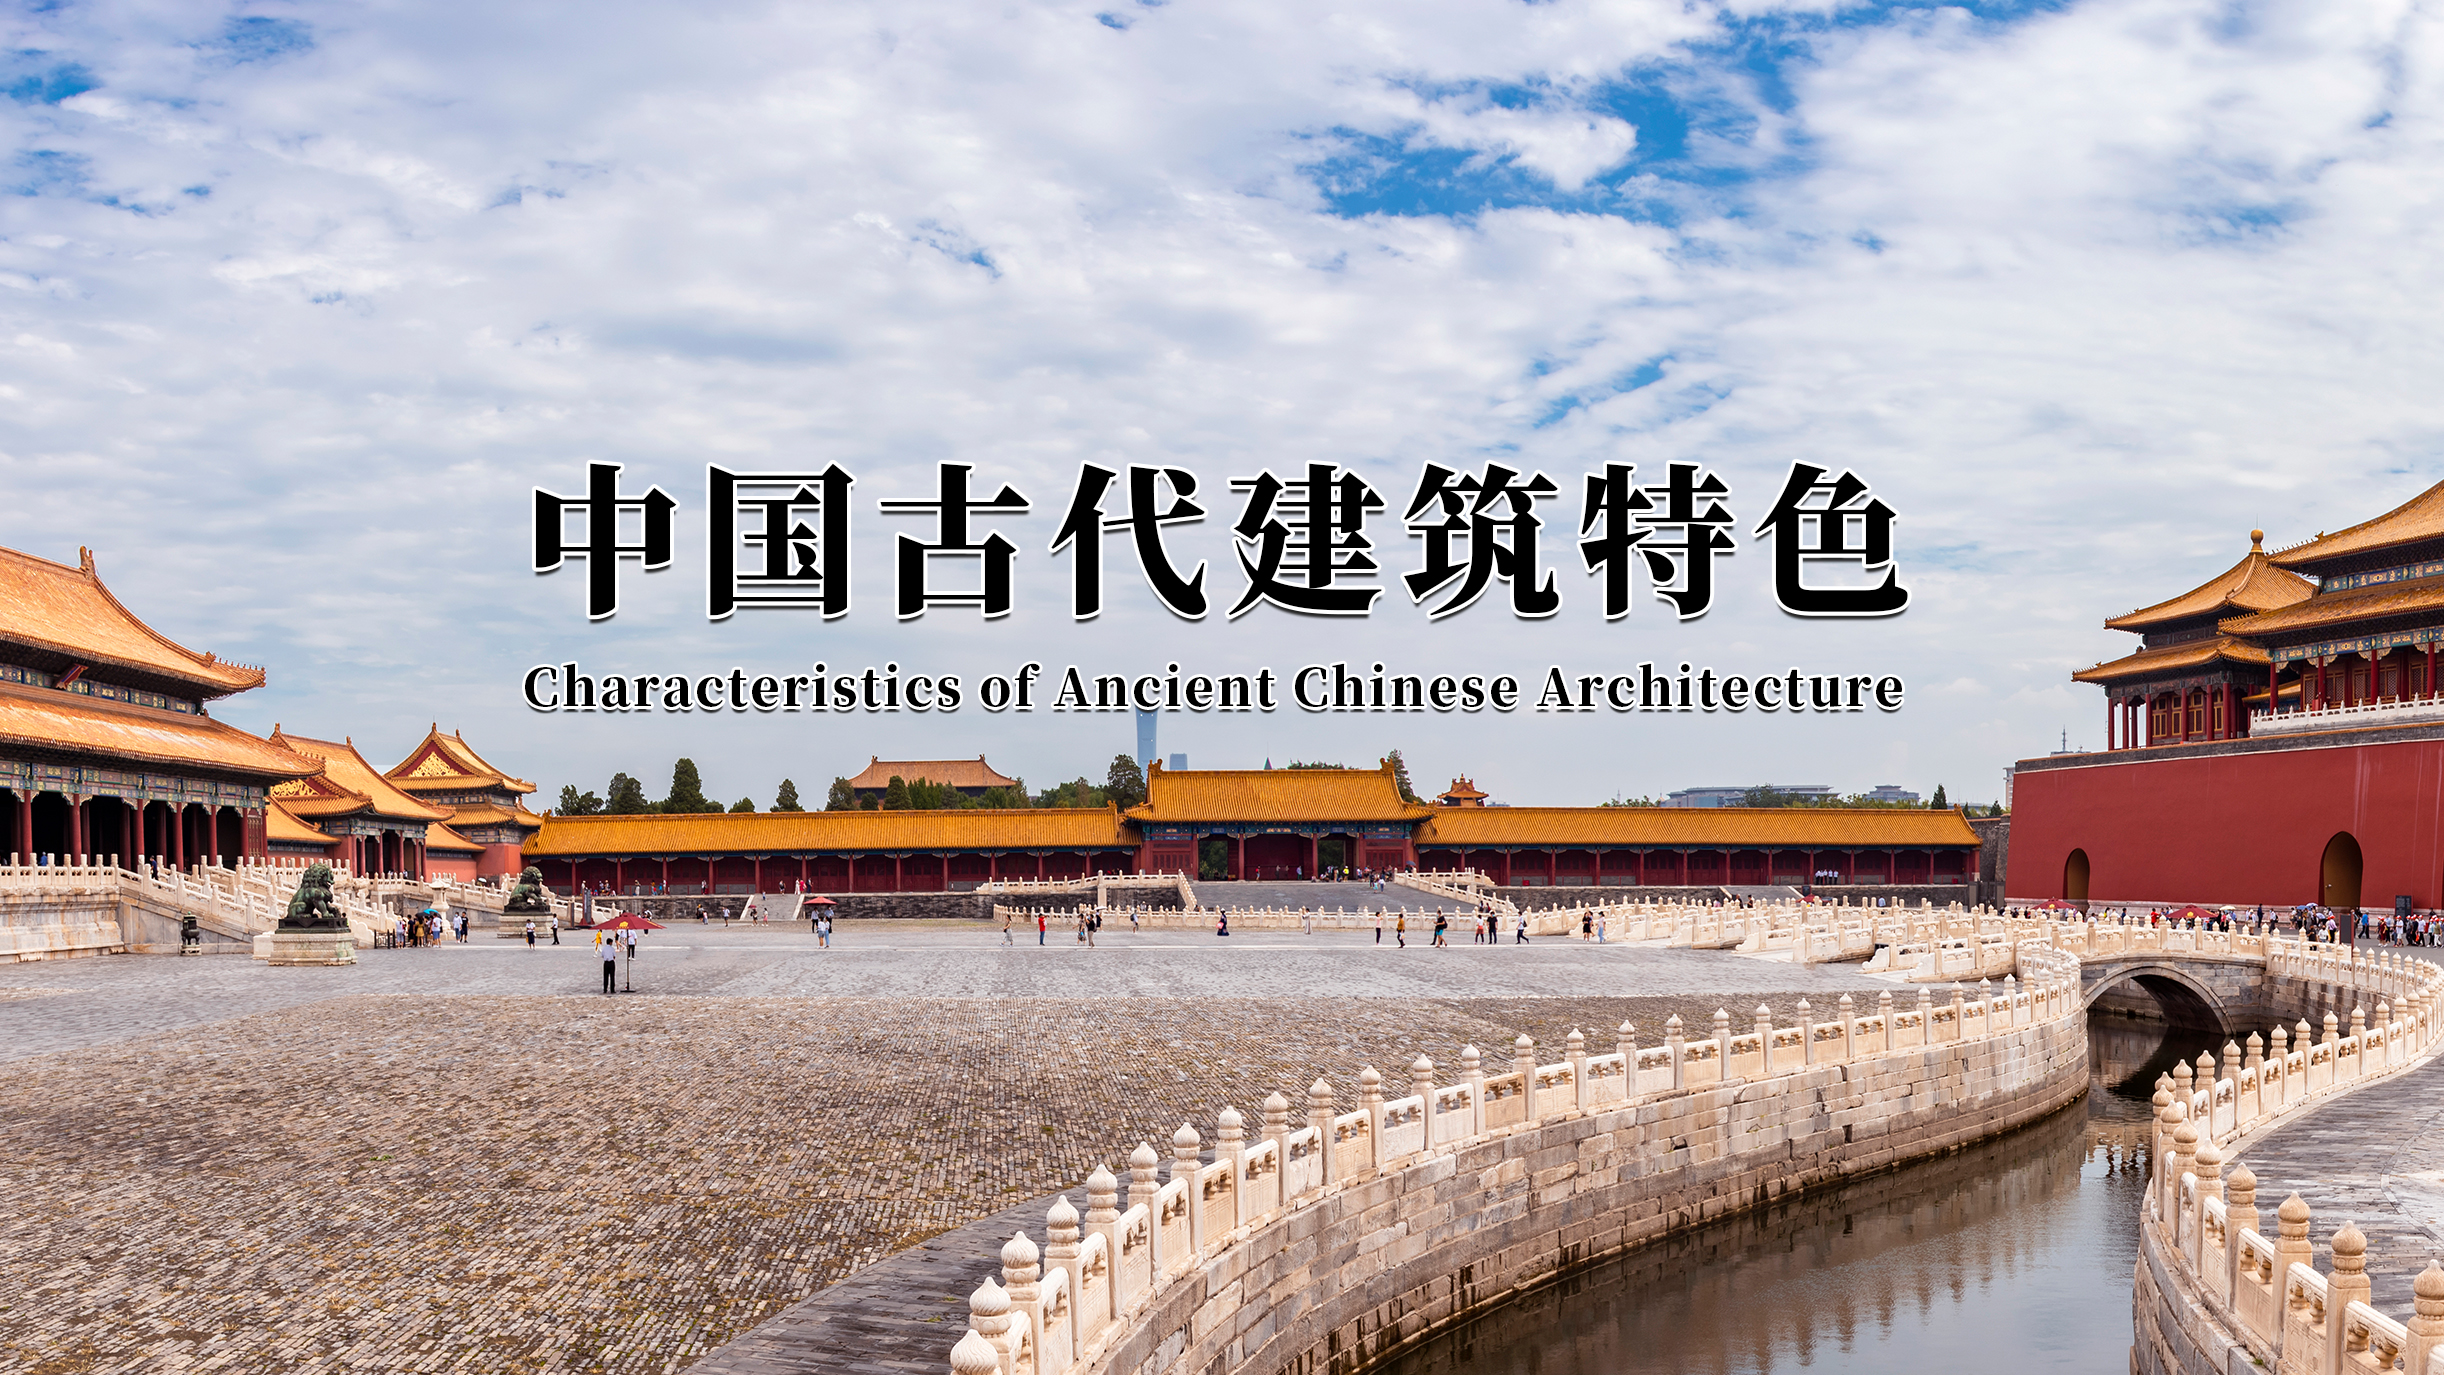 Characteristics of Ancient Chinese Architecture